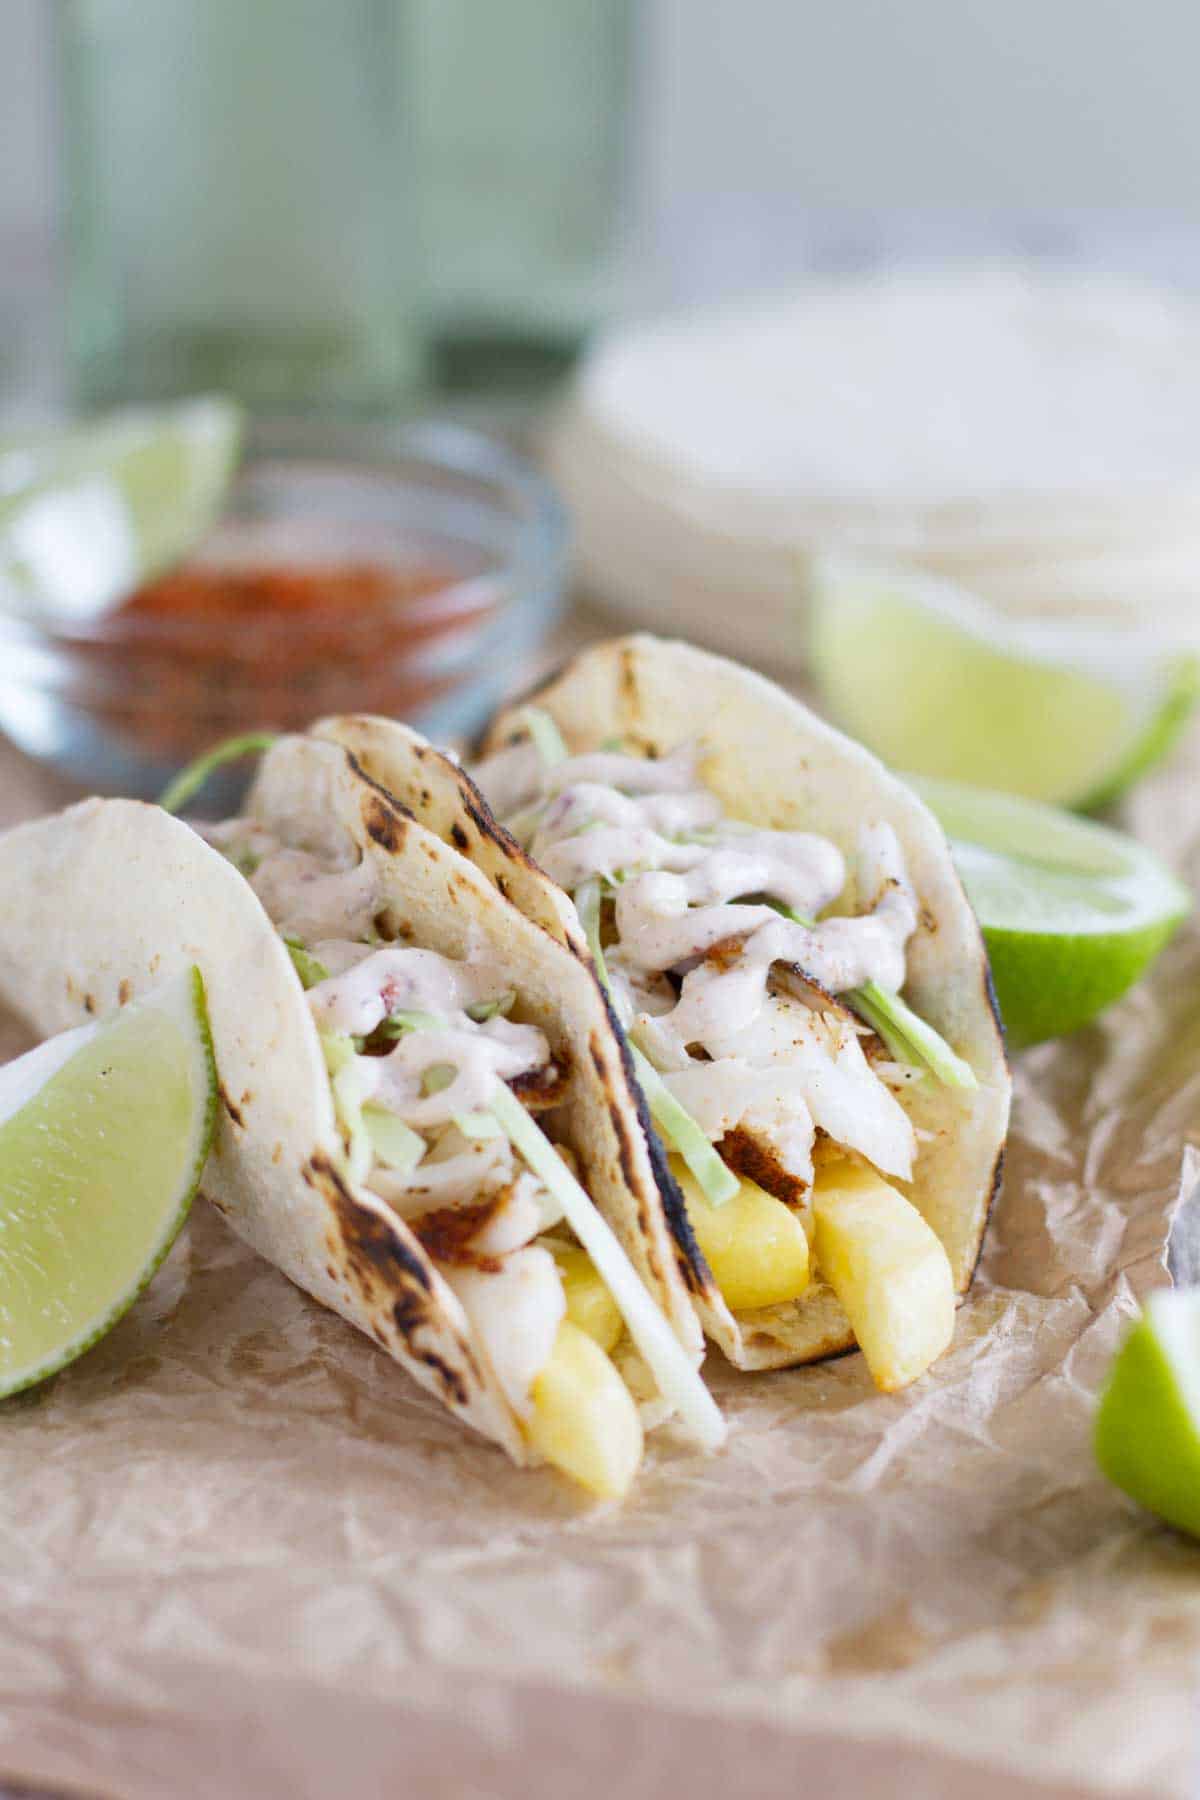 https://www.tasteandtellblog.com/wp-content/uploads/2020/03/Fish-and-Chips-Tacos-recipe-Taste-and-Tell-1-new.jpg